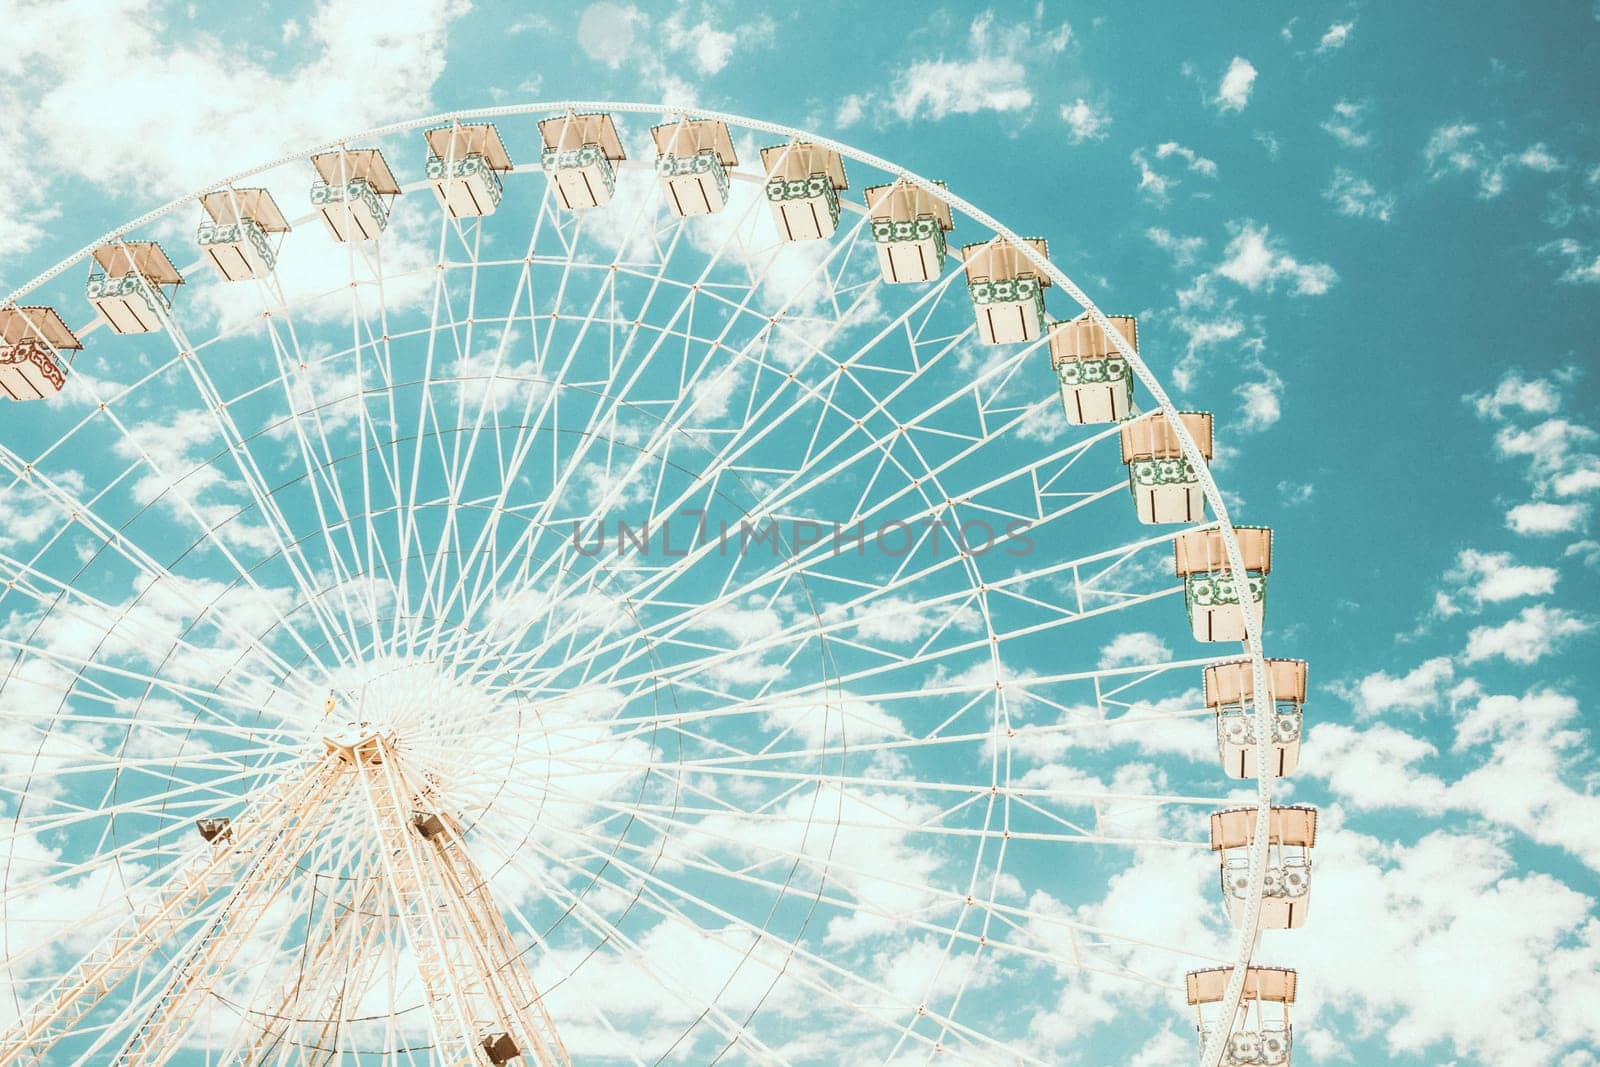 Ferris wheel of fair and amusement park. White clouds in the blue sky in background.